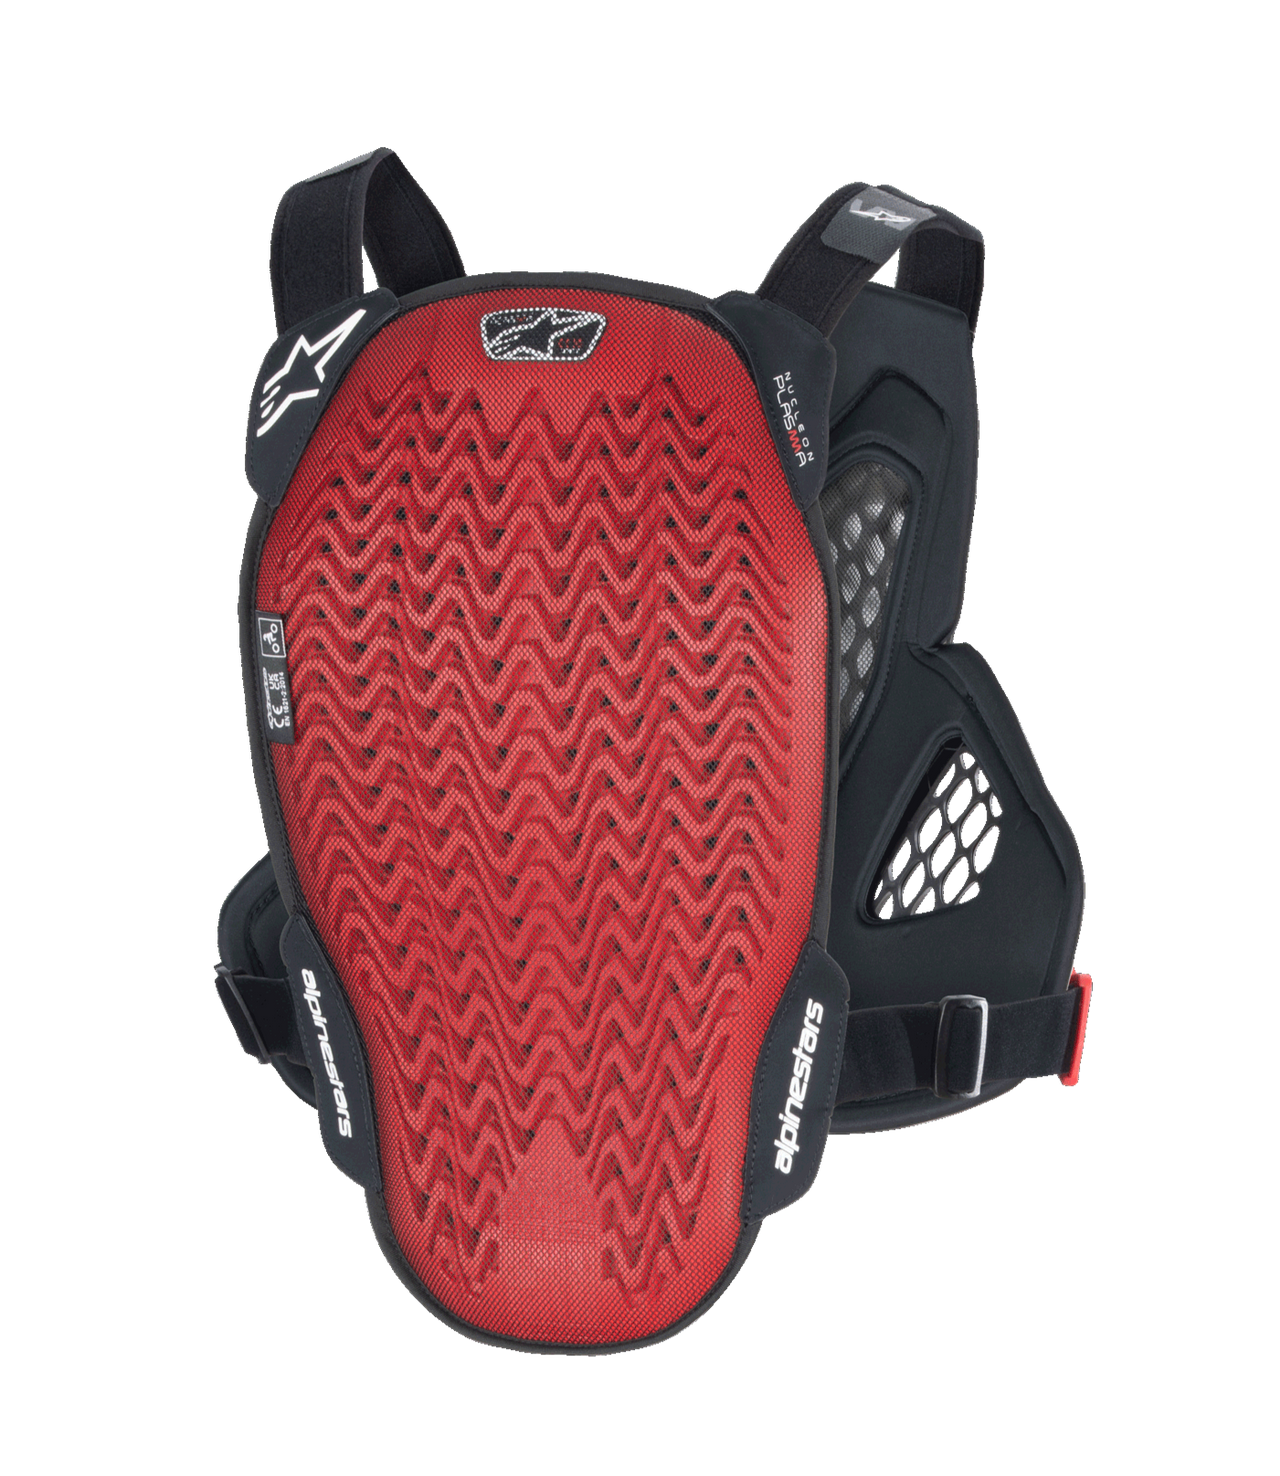 A-6 Plasma Chest Protector